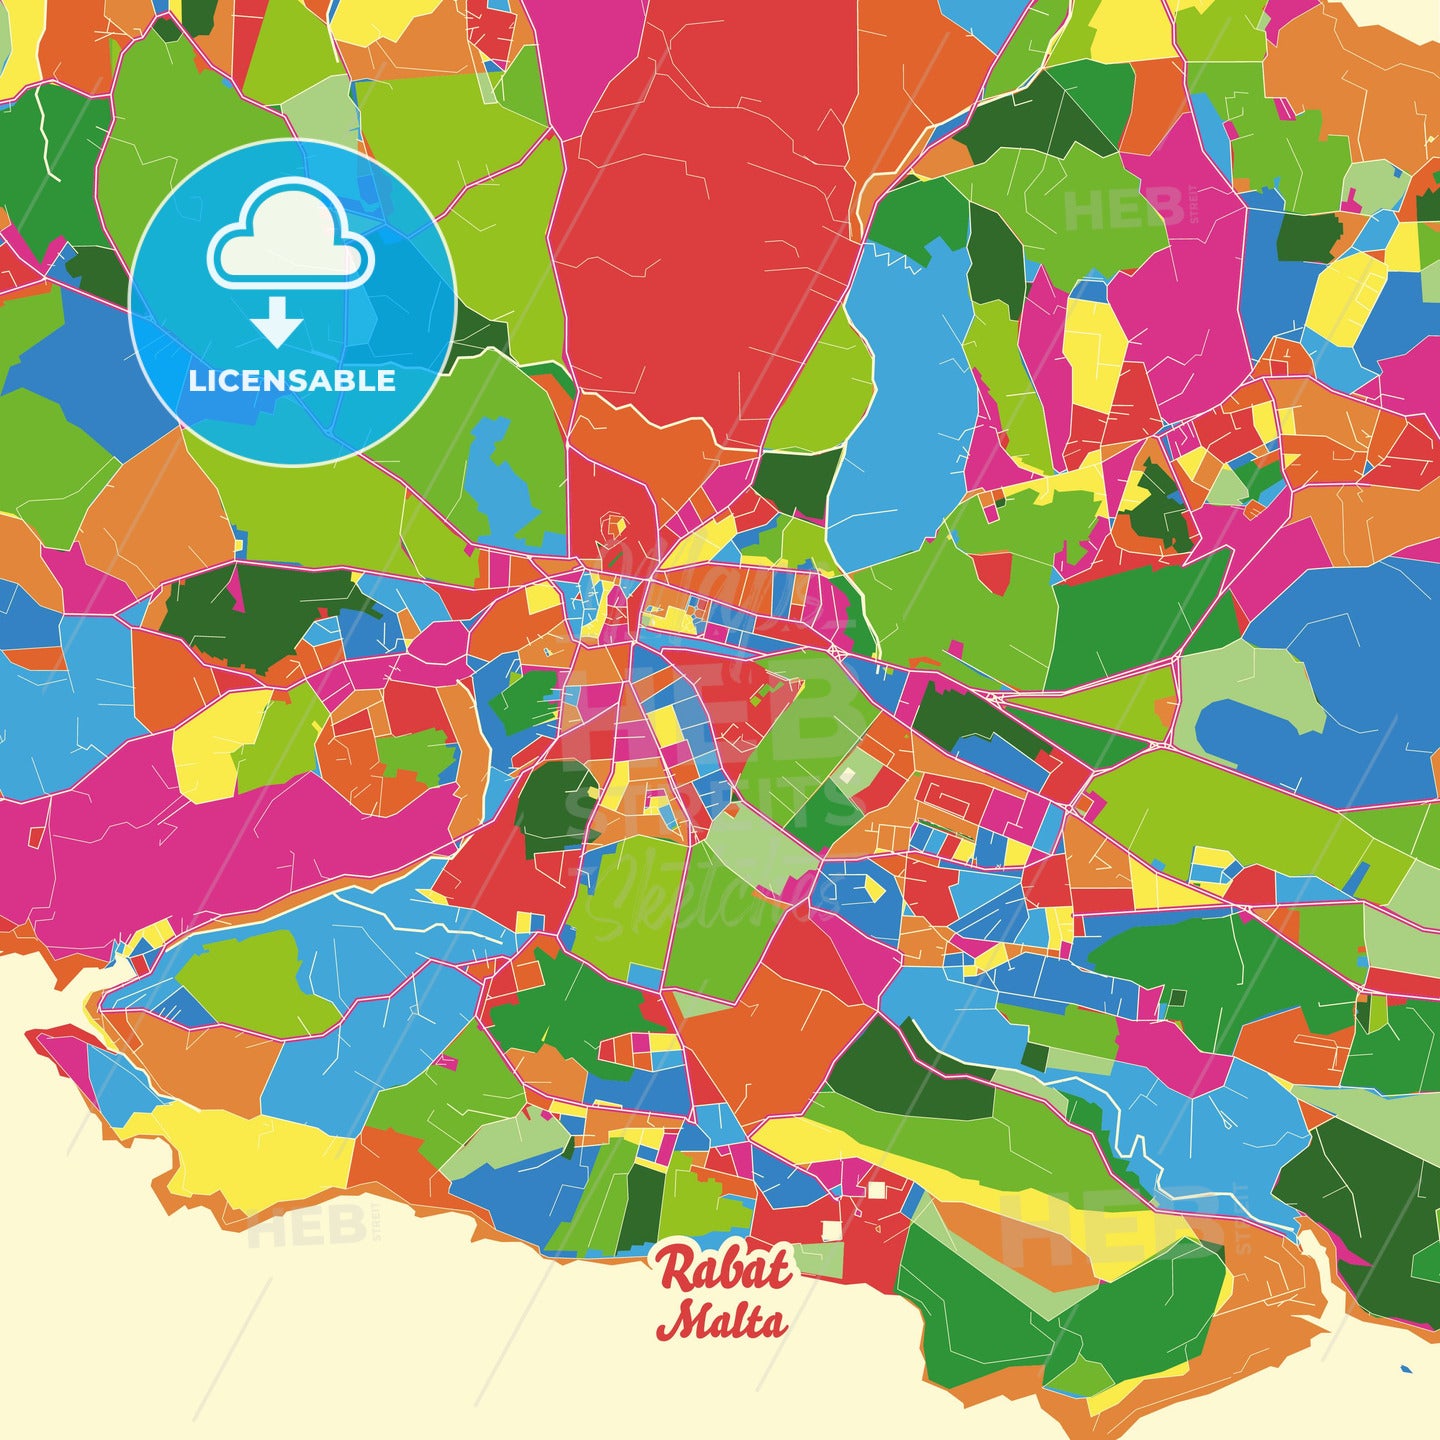 Rabat, Malta Crazy Colorful Street Map Poster Template - HEBSTREITS Sketches